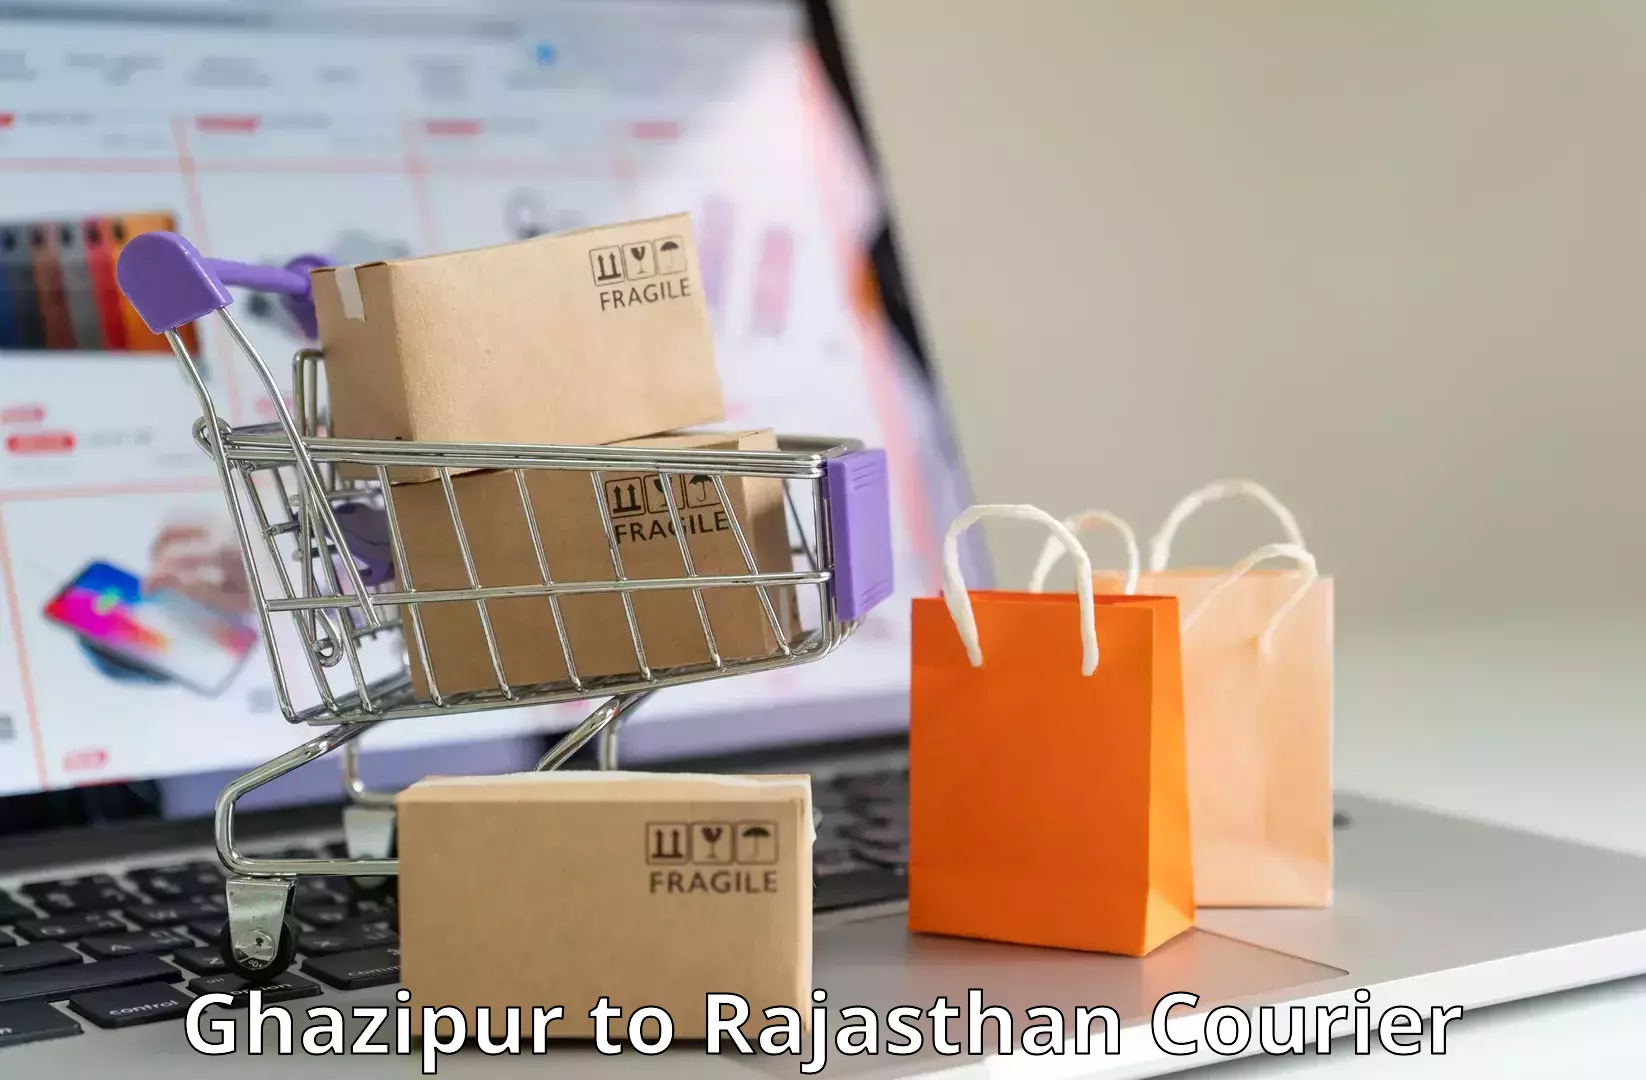 Multi-service courier options Ghazipur to Dholpur